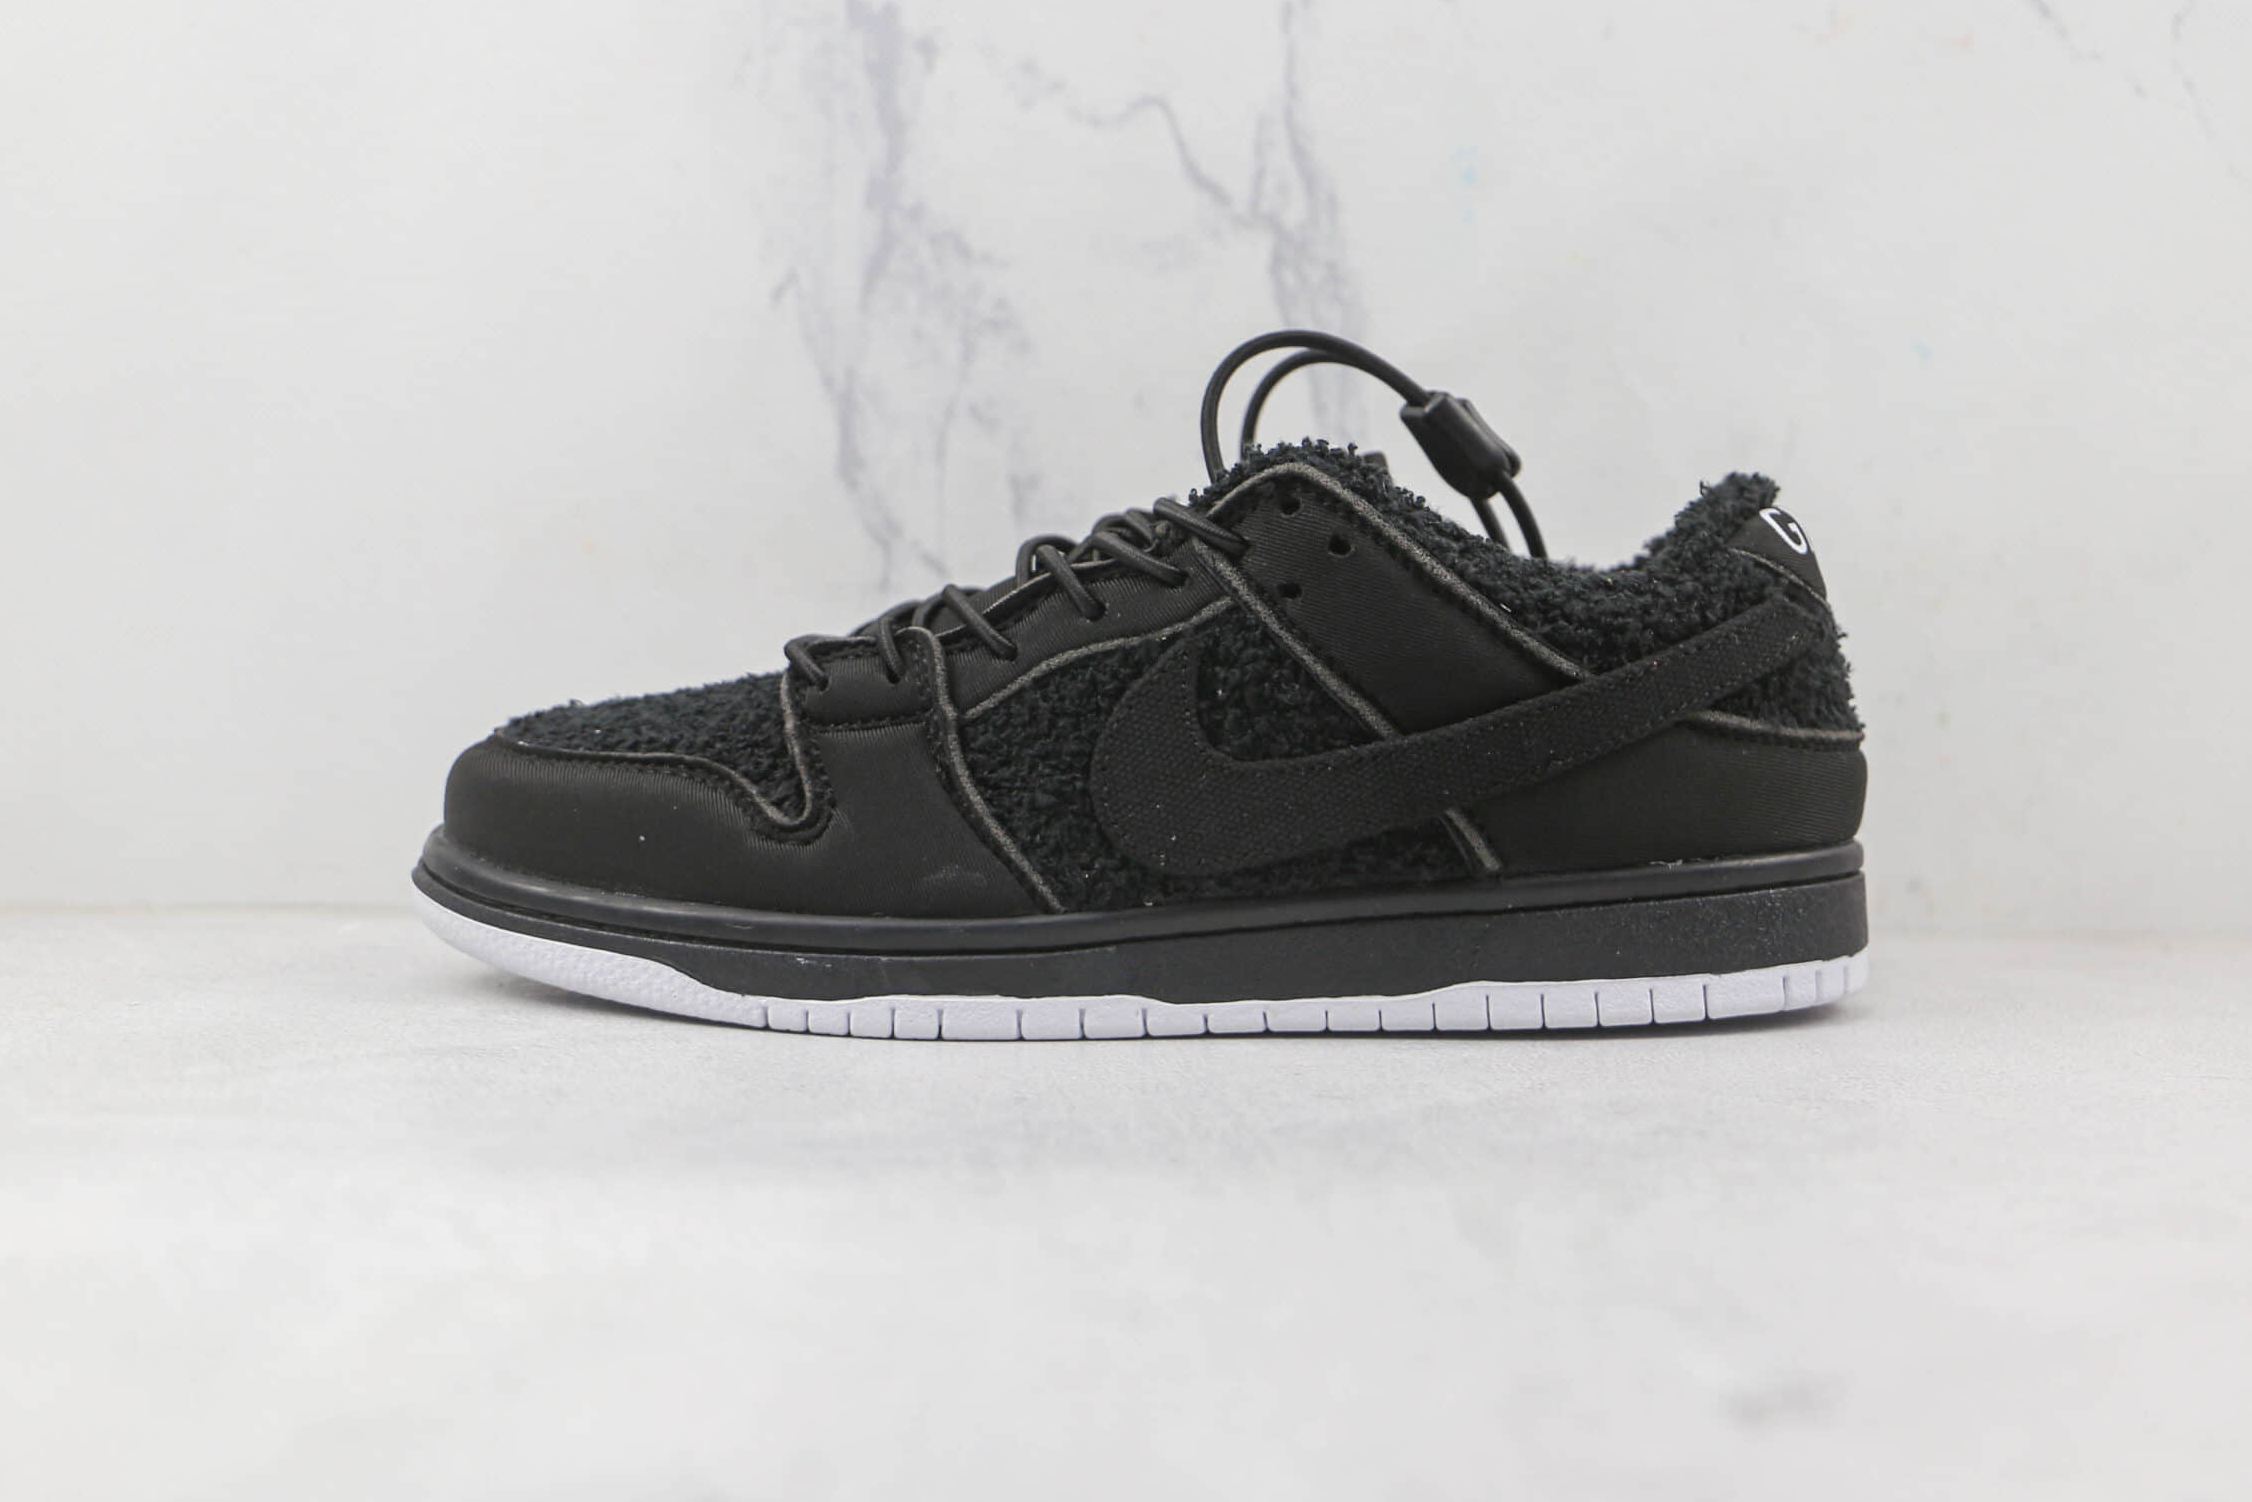 Nike Gnarhunters x Dunk Low SB 'Black' DH7756-010 - Exclusive Skate Shoe Collaboration | Limited Stock!